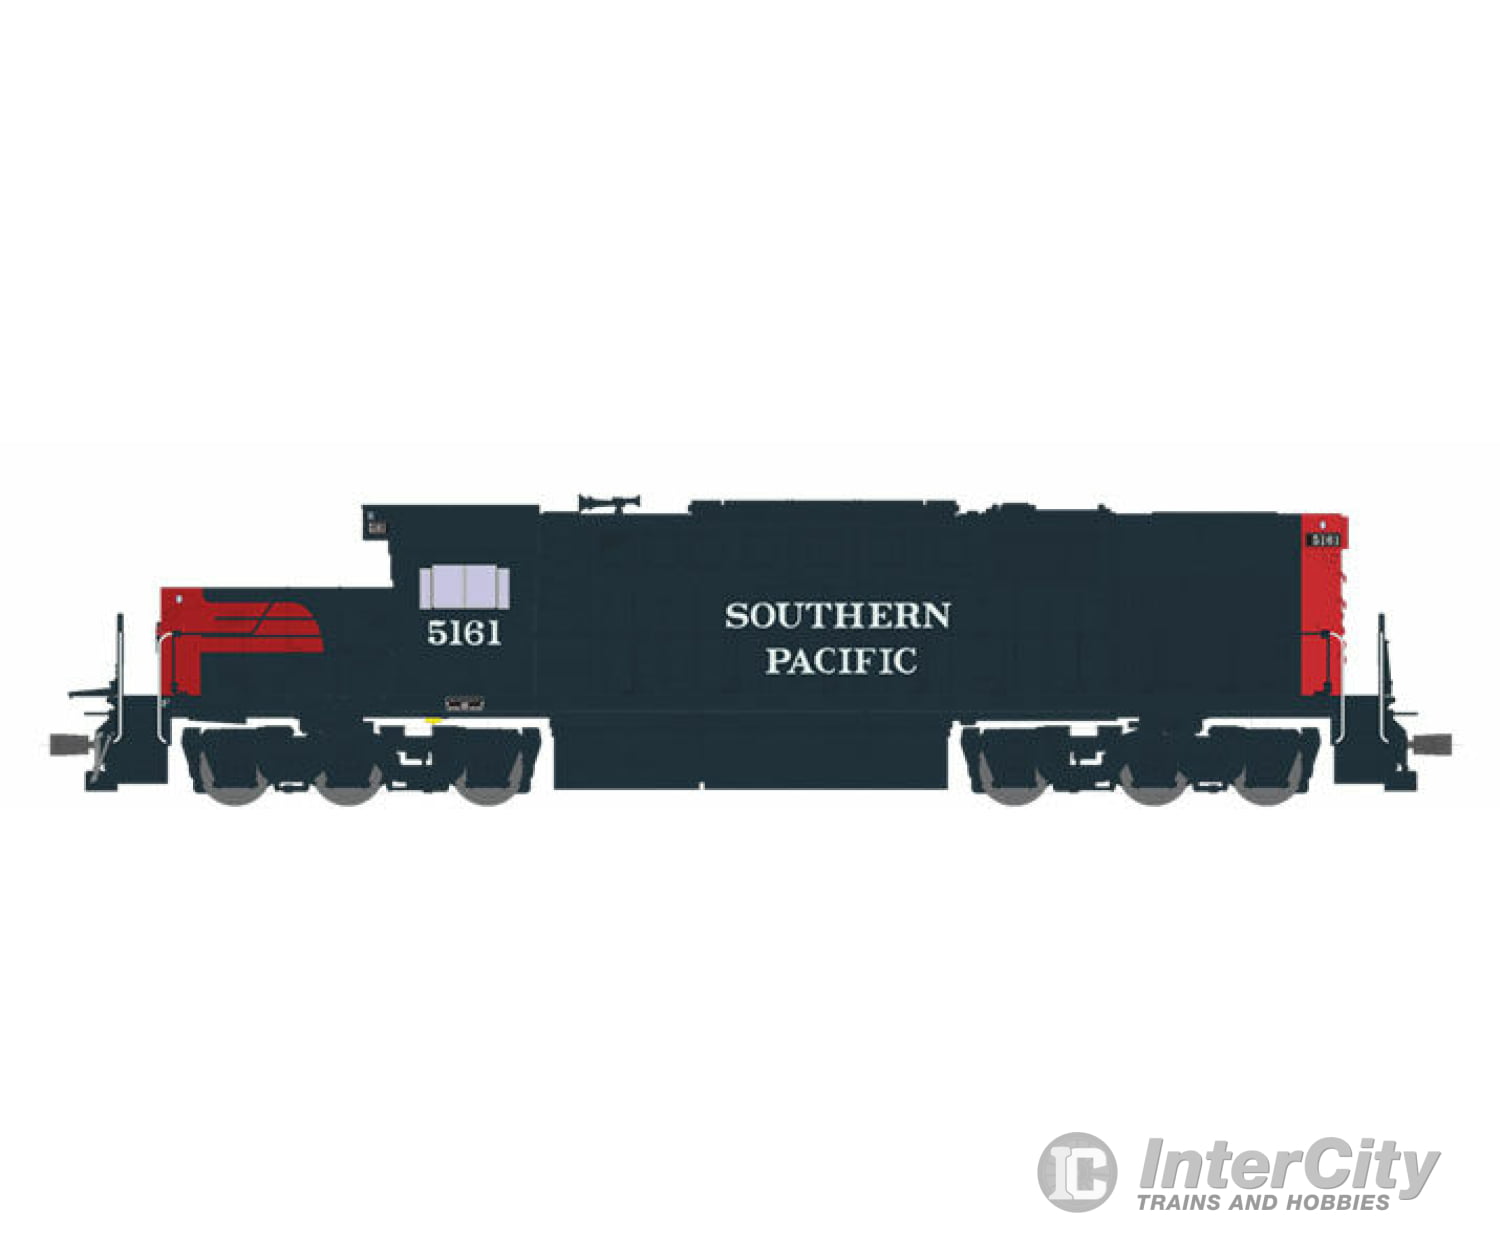 Broadway Limited 4888 Ho Alco Rsd15 Low Nose W/Sound & Dcc - Paragon3(Tm) -- Southern Pacific #5161